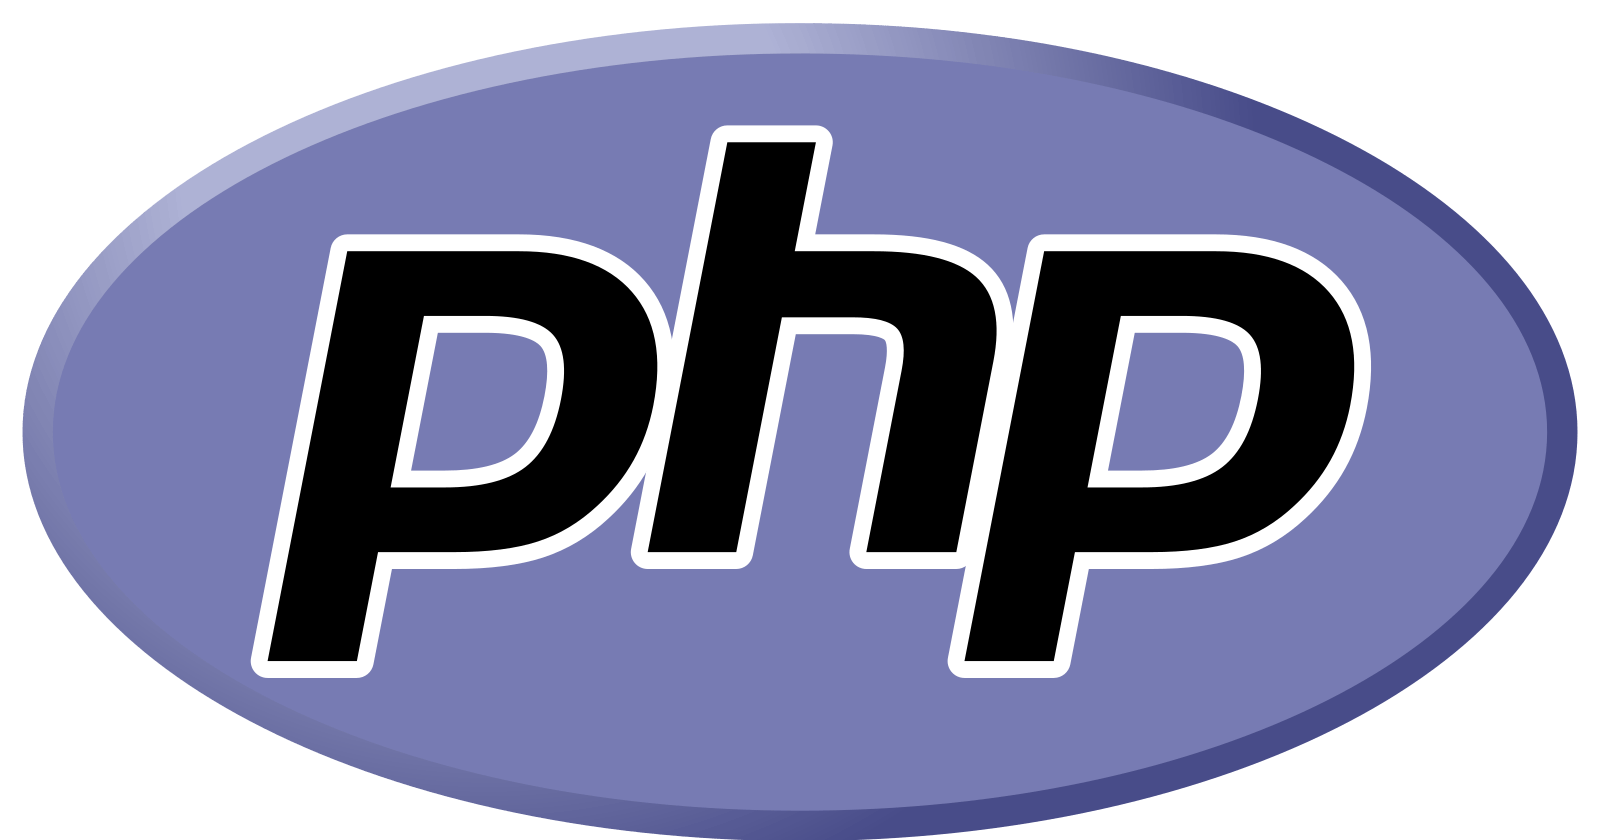 What is the PHP Programming Language? Why Should I Use PHP?